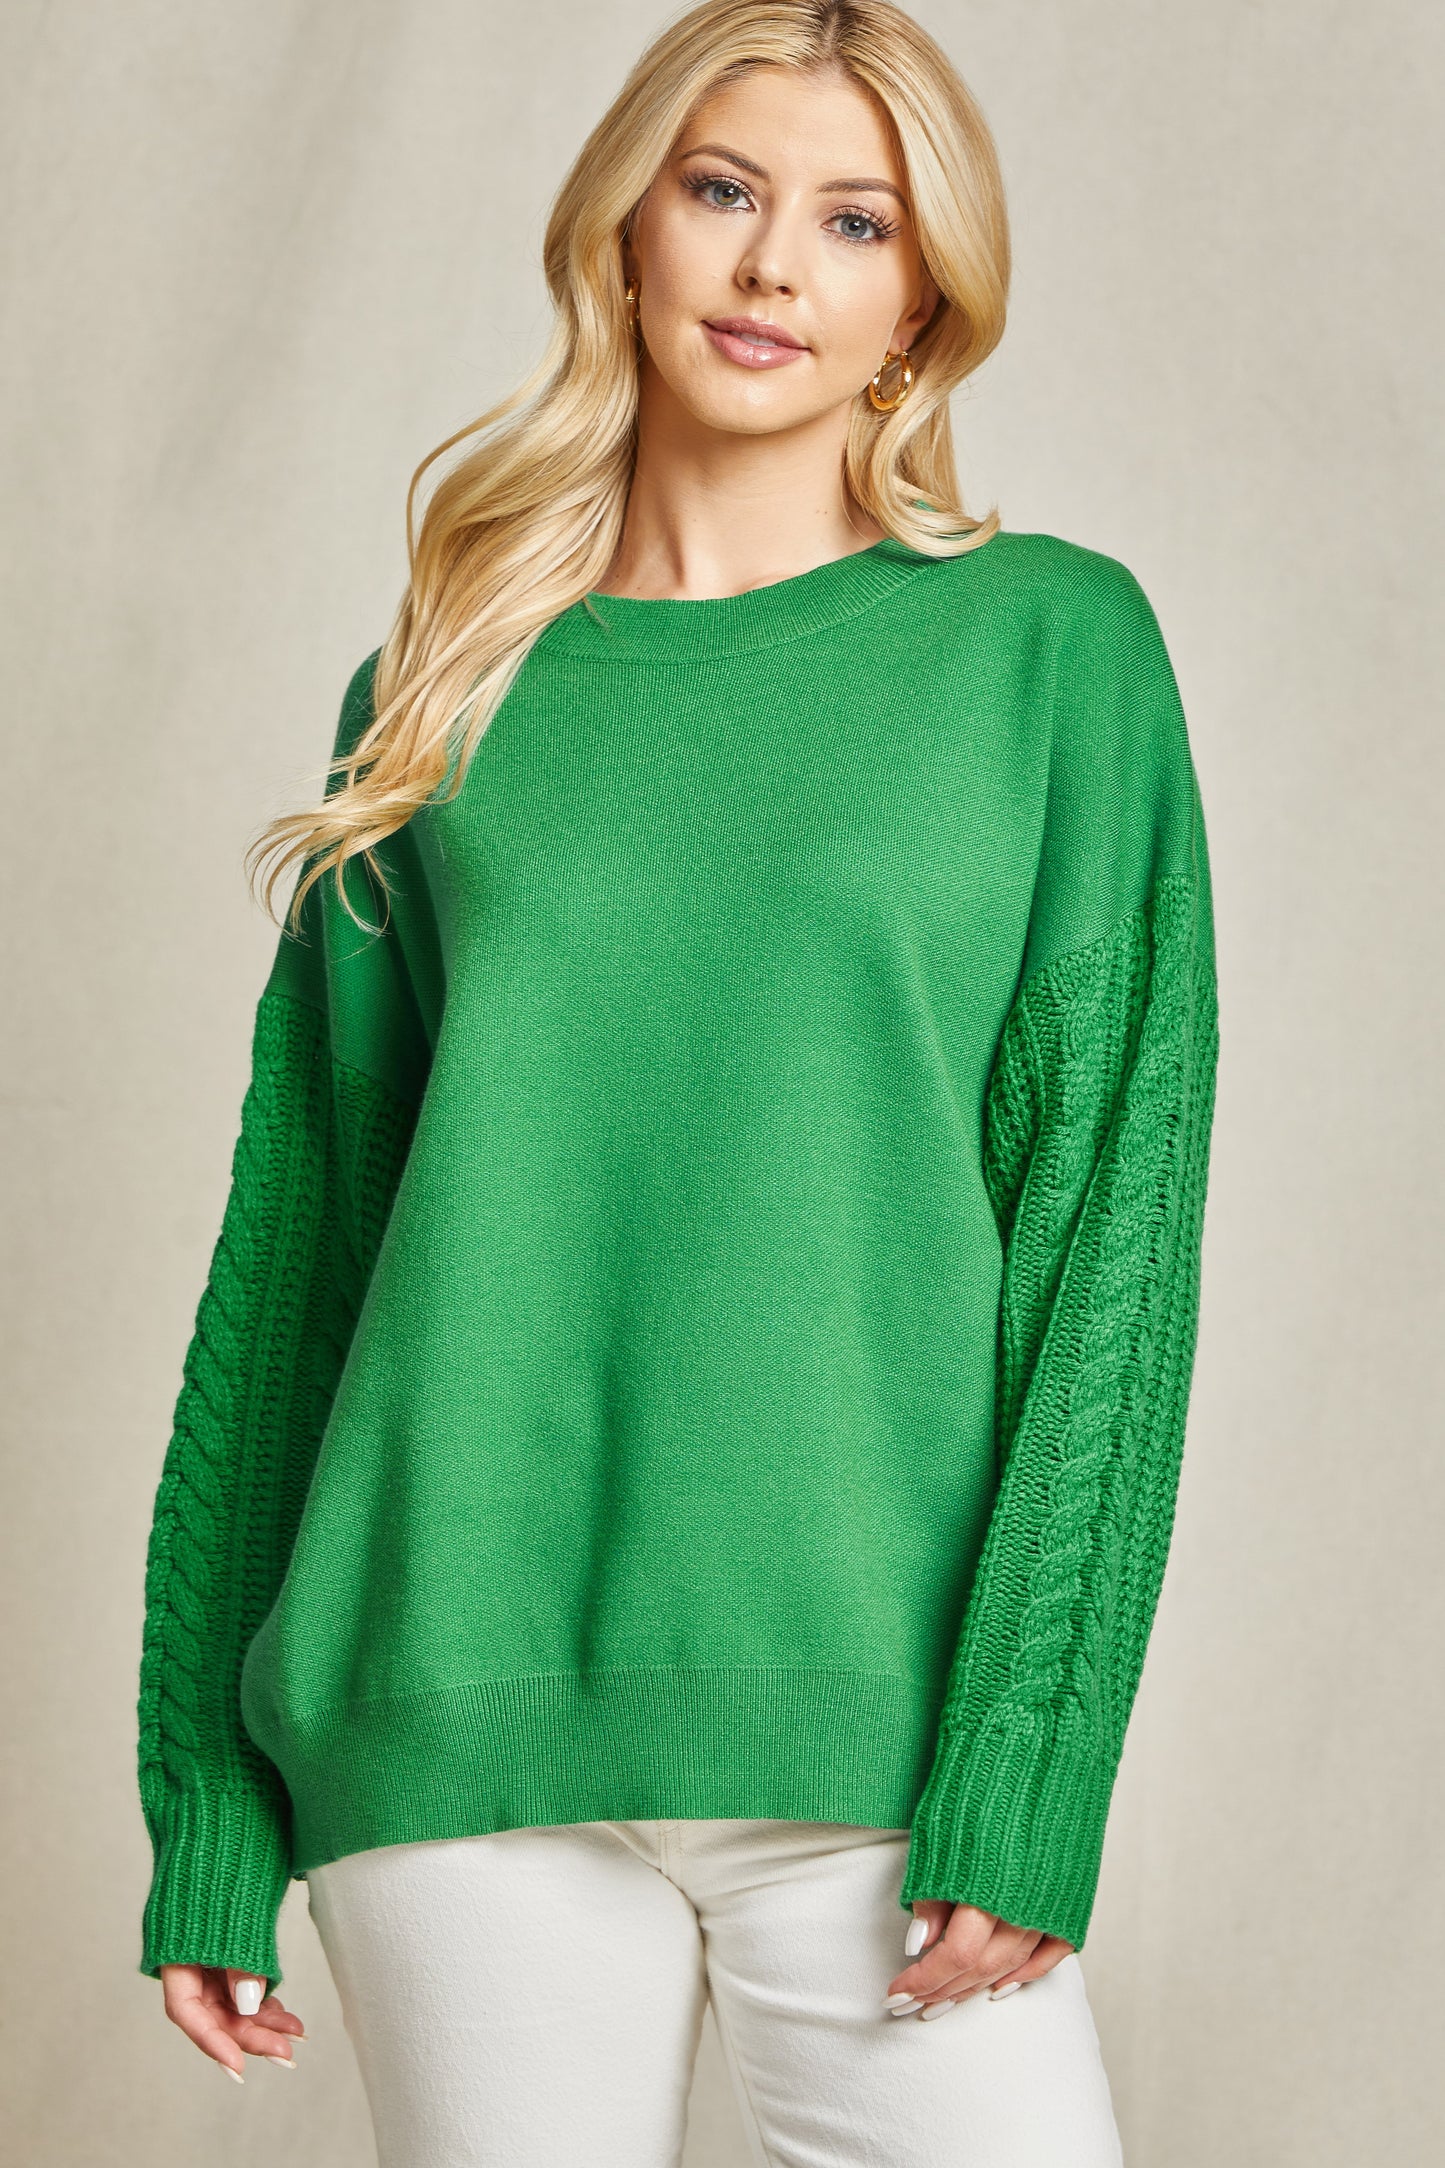 Beeson River Knitted Sleeve Sweater